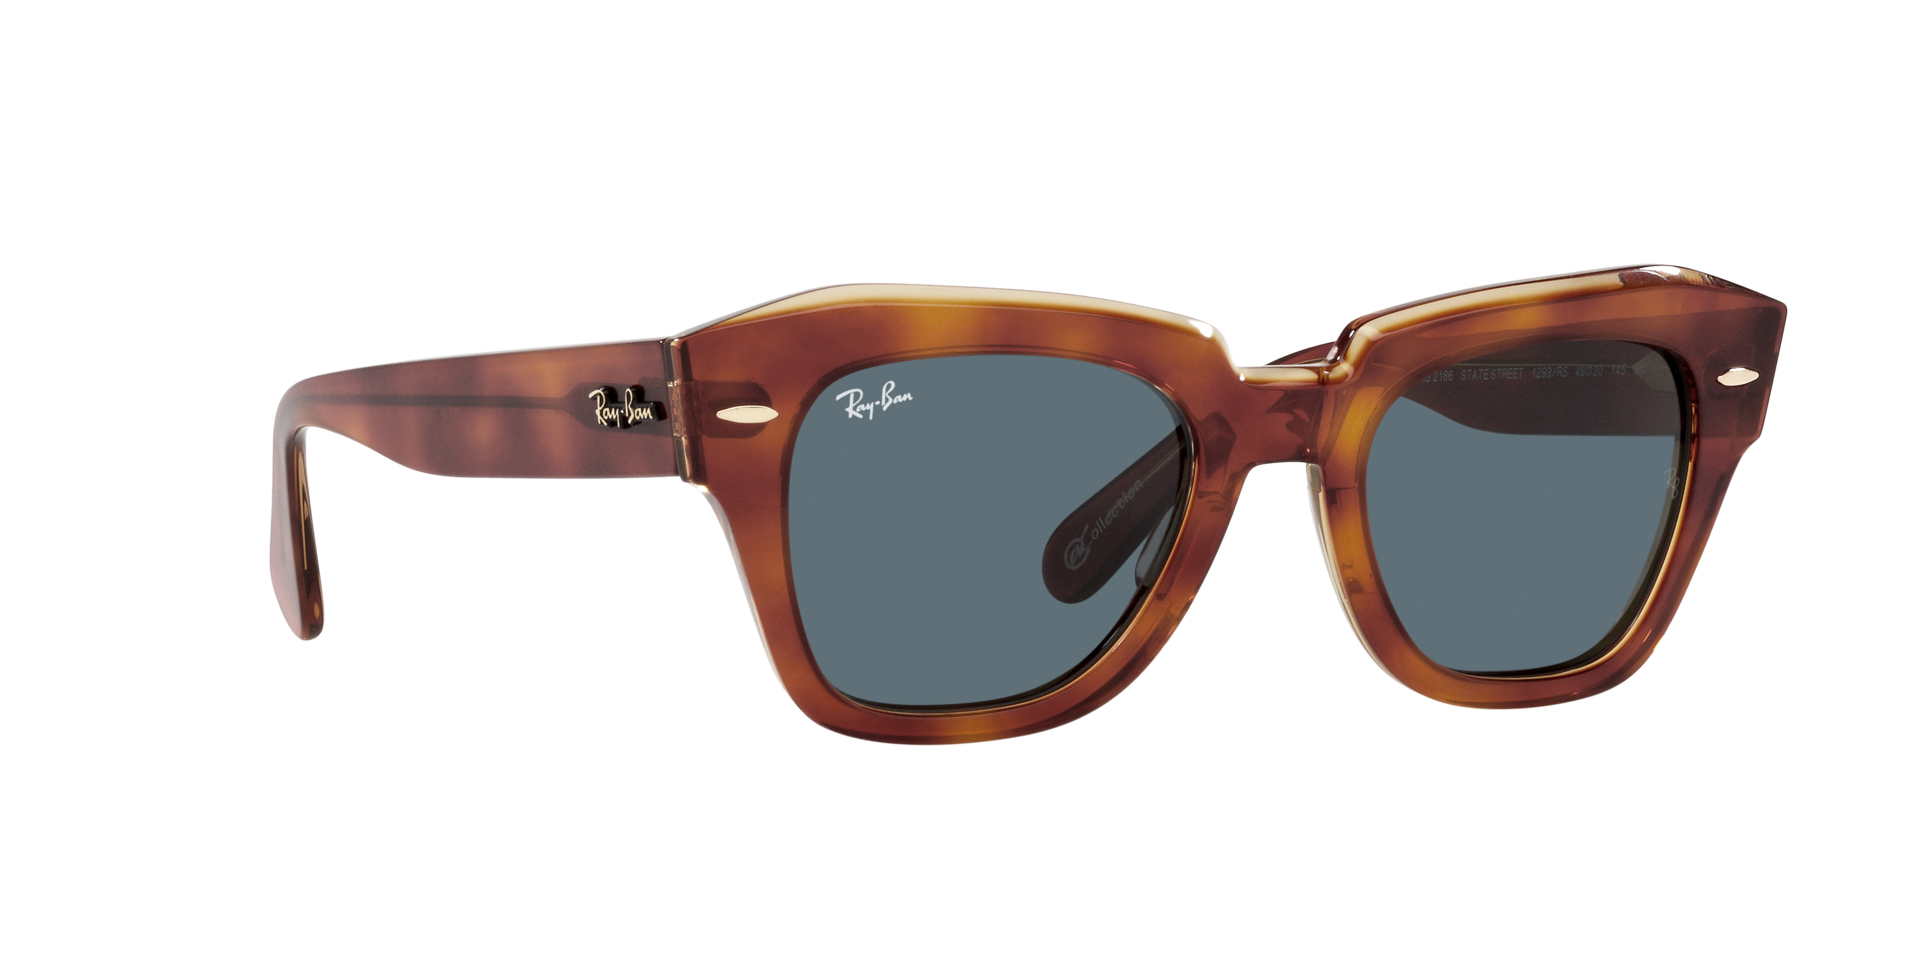 Buy Ray-Ban State Street @Collection Sunglasses Online.